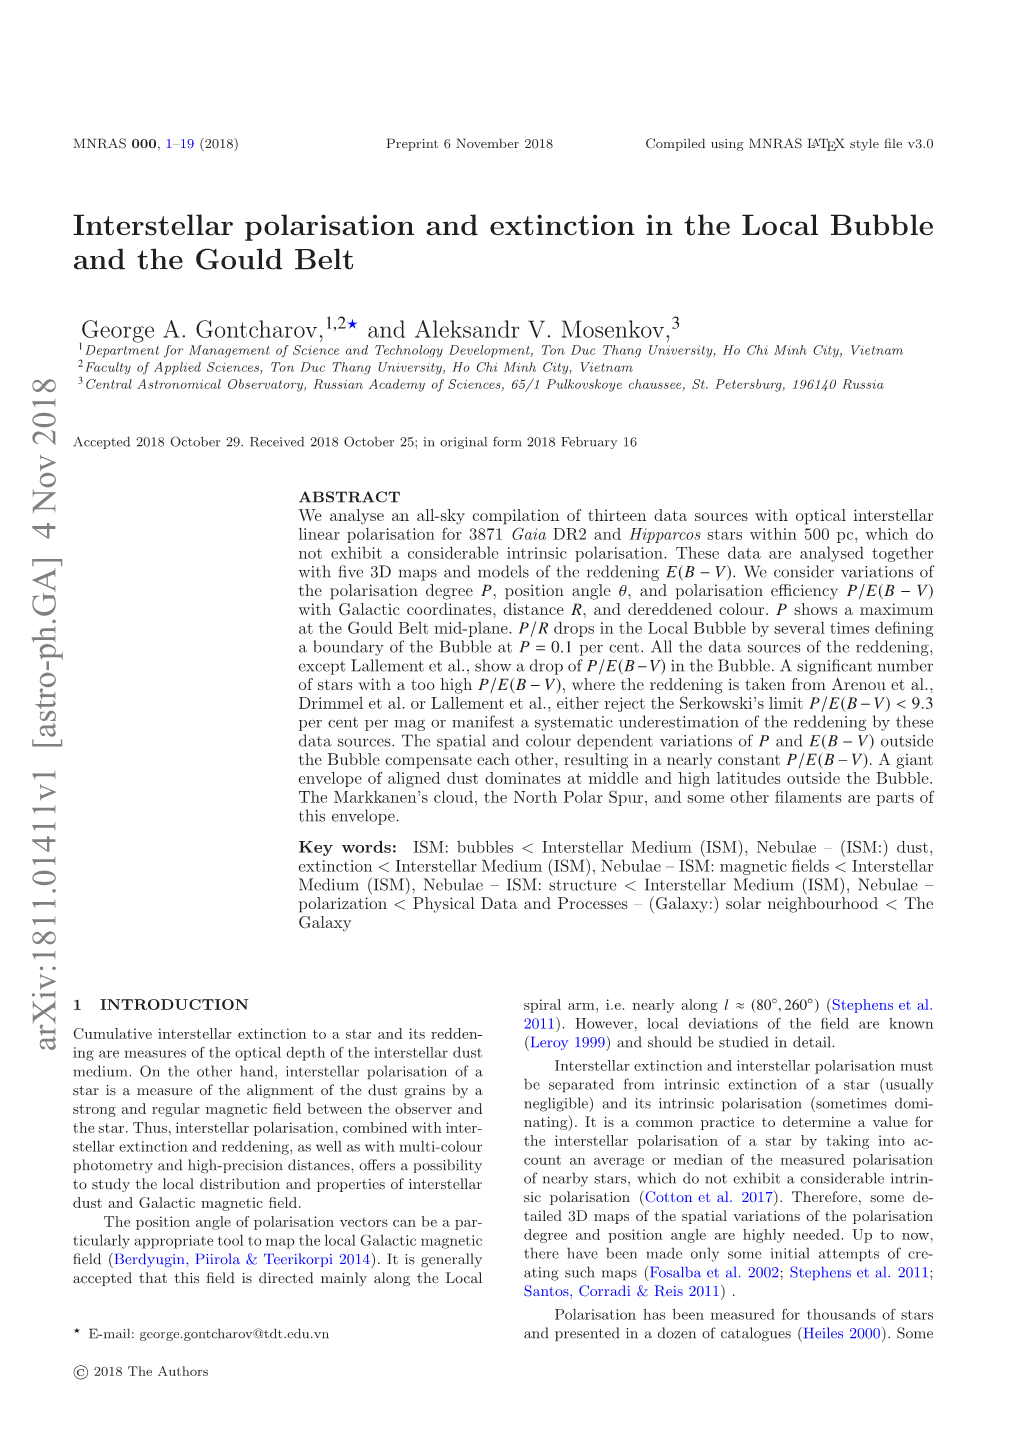 Interstellar Polarisation and Extinction in the Local Bubble and the Gould